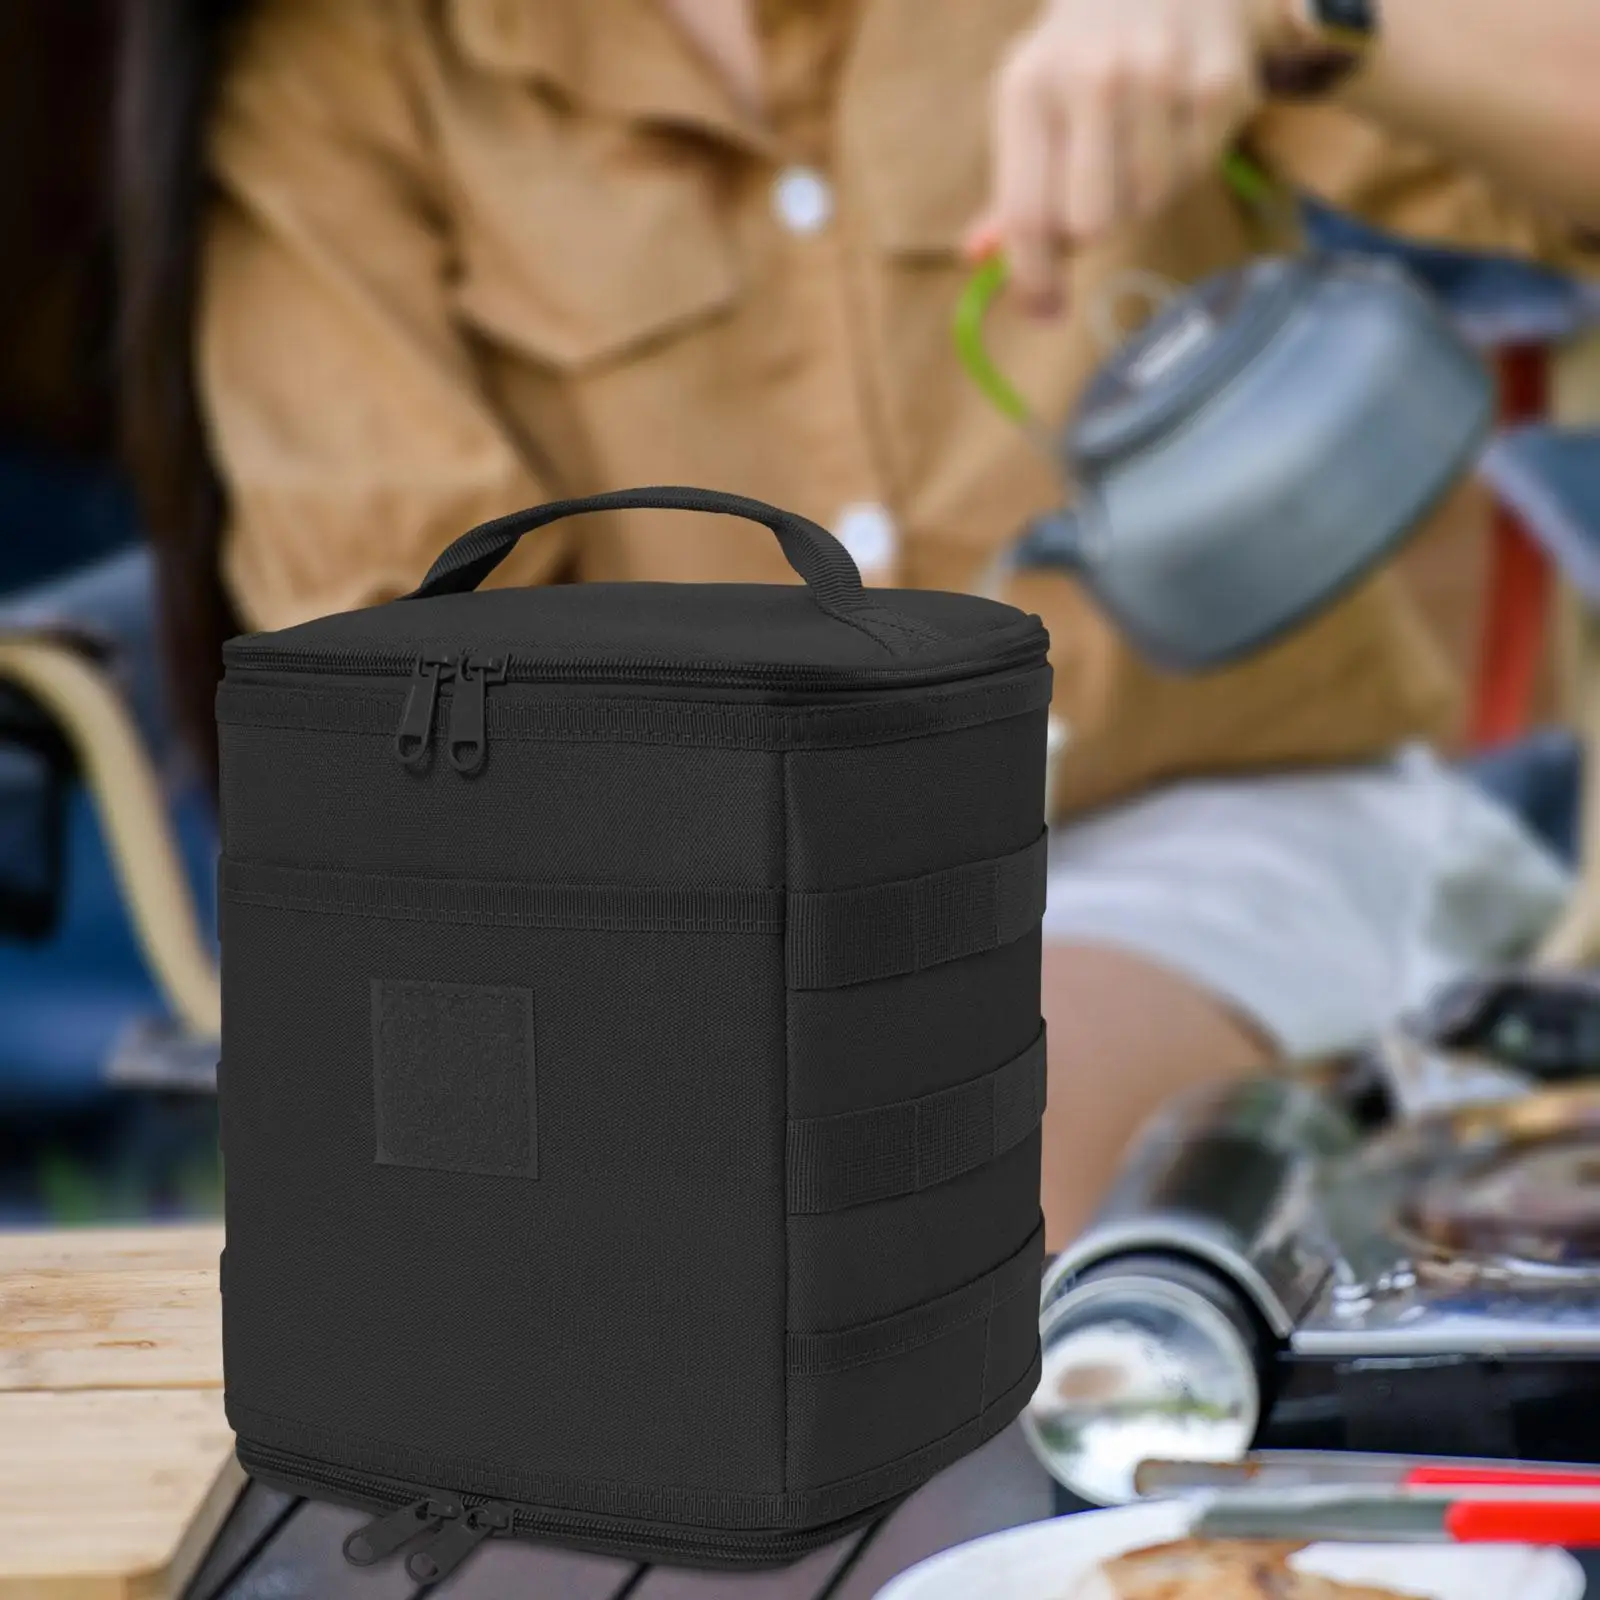 Gas Tank Storage Bag Protective Cover Protection Multifunction Storage Case for Travel Outdoor Cooking Hiking Backpacking